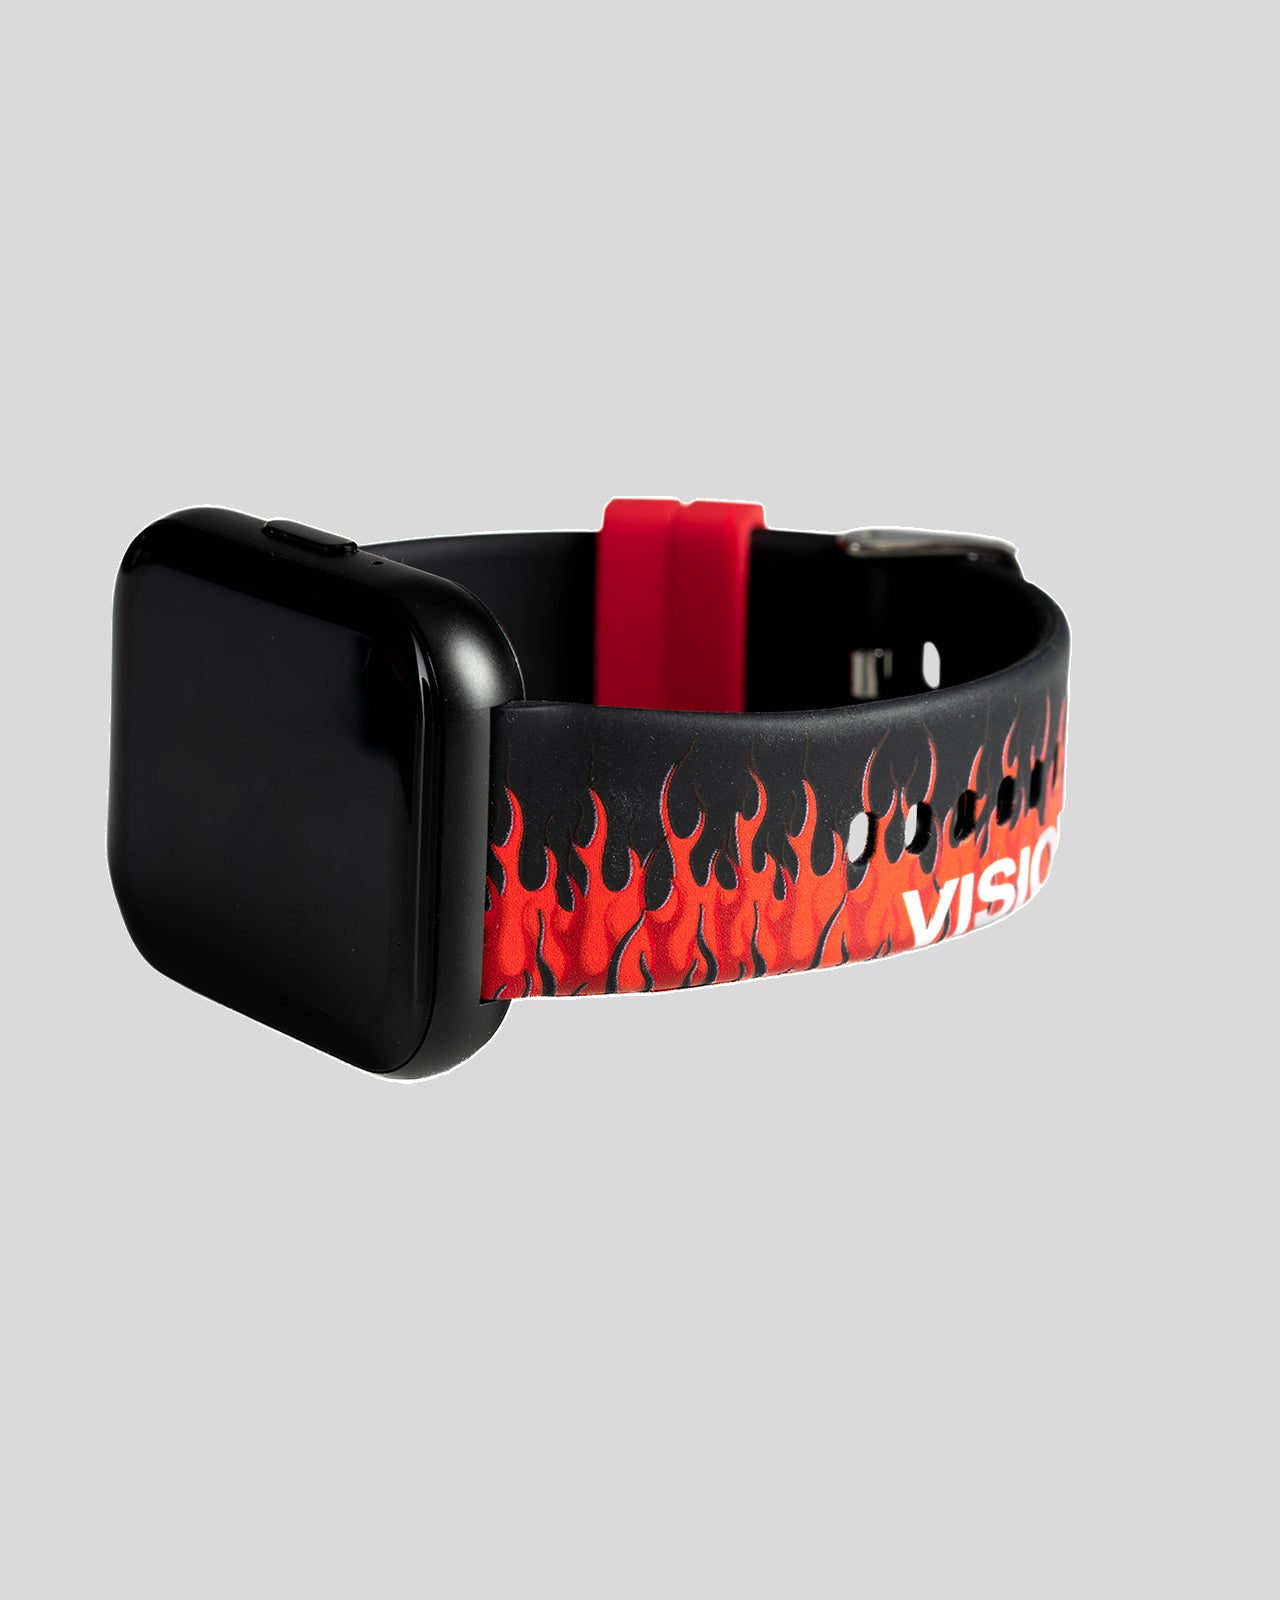 BLACK SMARTWATCH WITH RED FLAMES AND WHITE LOGO